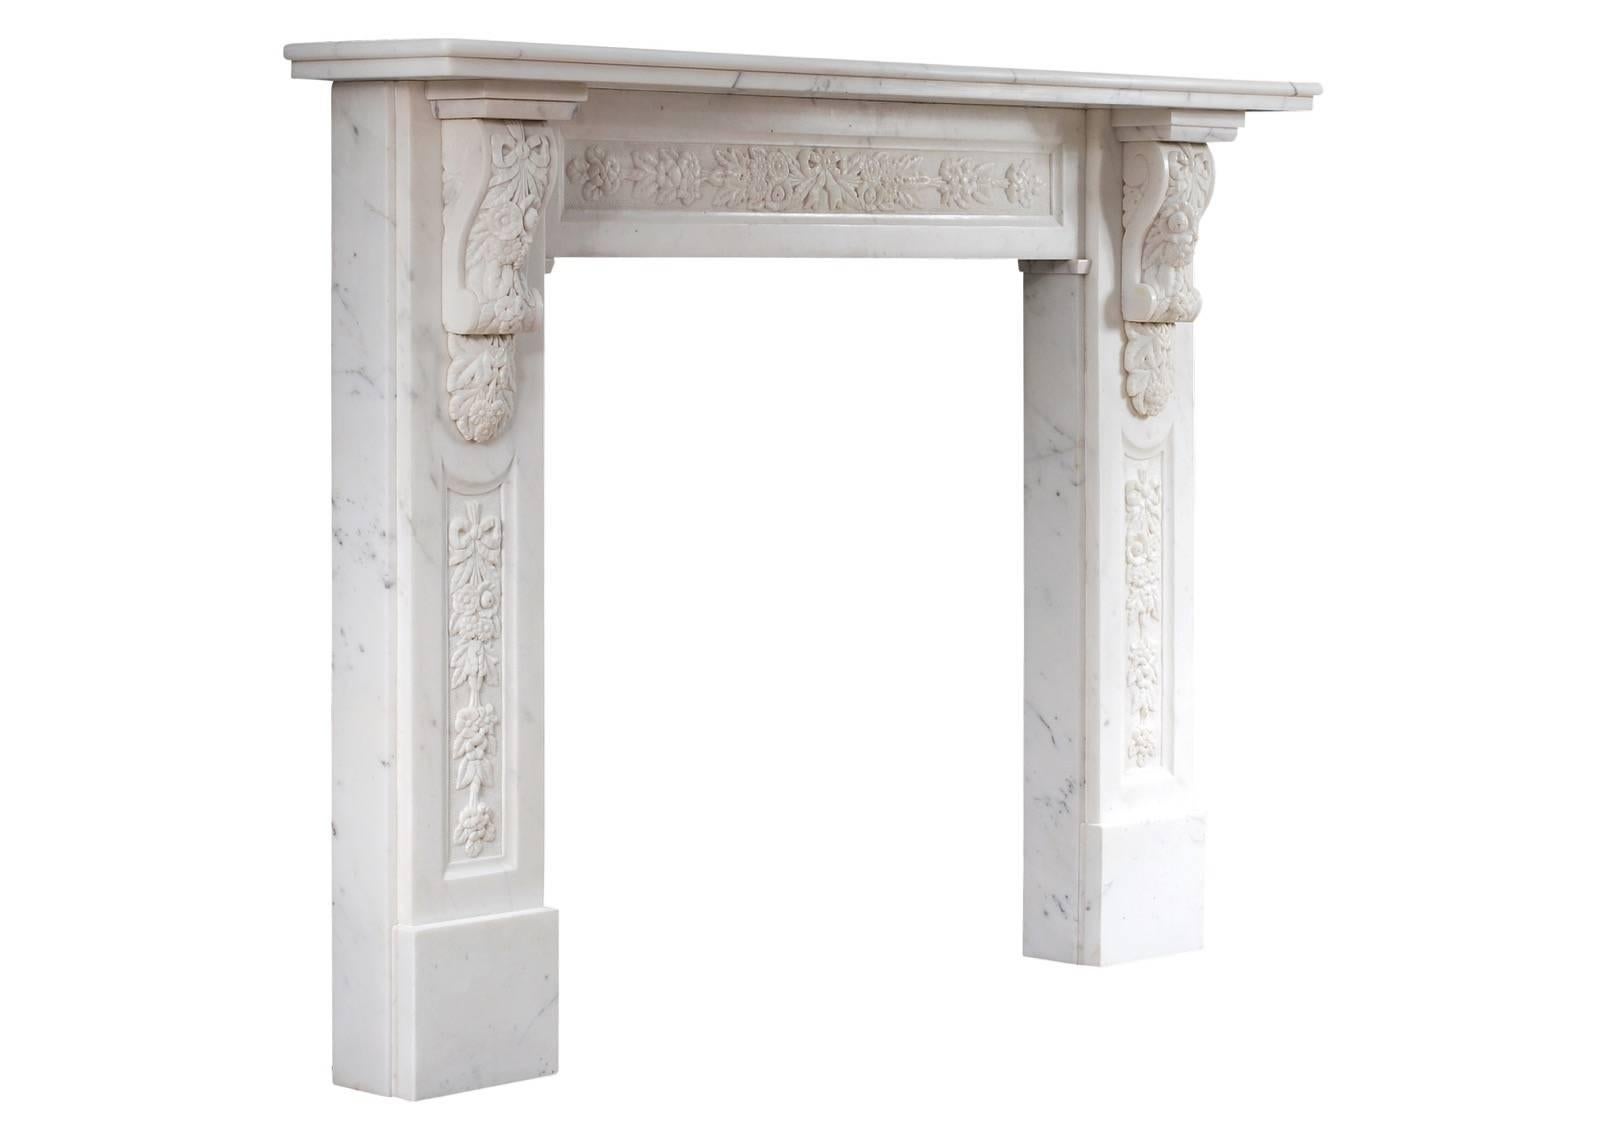 An early Victorian English statuary marble fireplace. The panelled jambs with carved flowers and foliage throughout surmounted by tied ribbons. Elaborately carved corbels above featuring cascading foliage and leafwork. The panelled frieze with